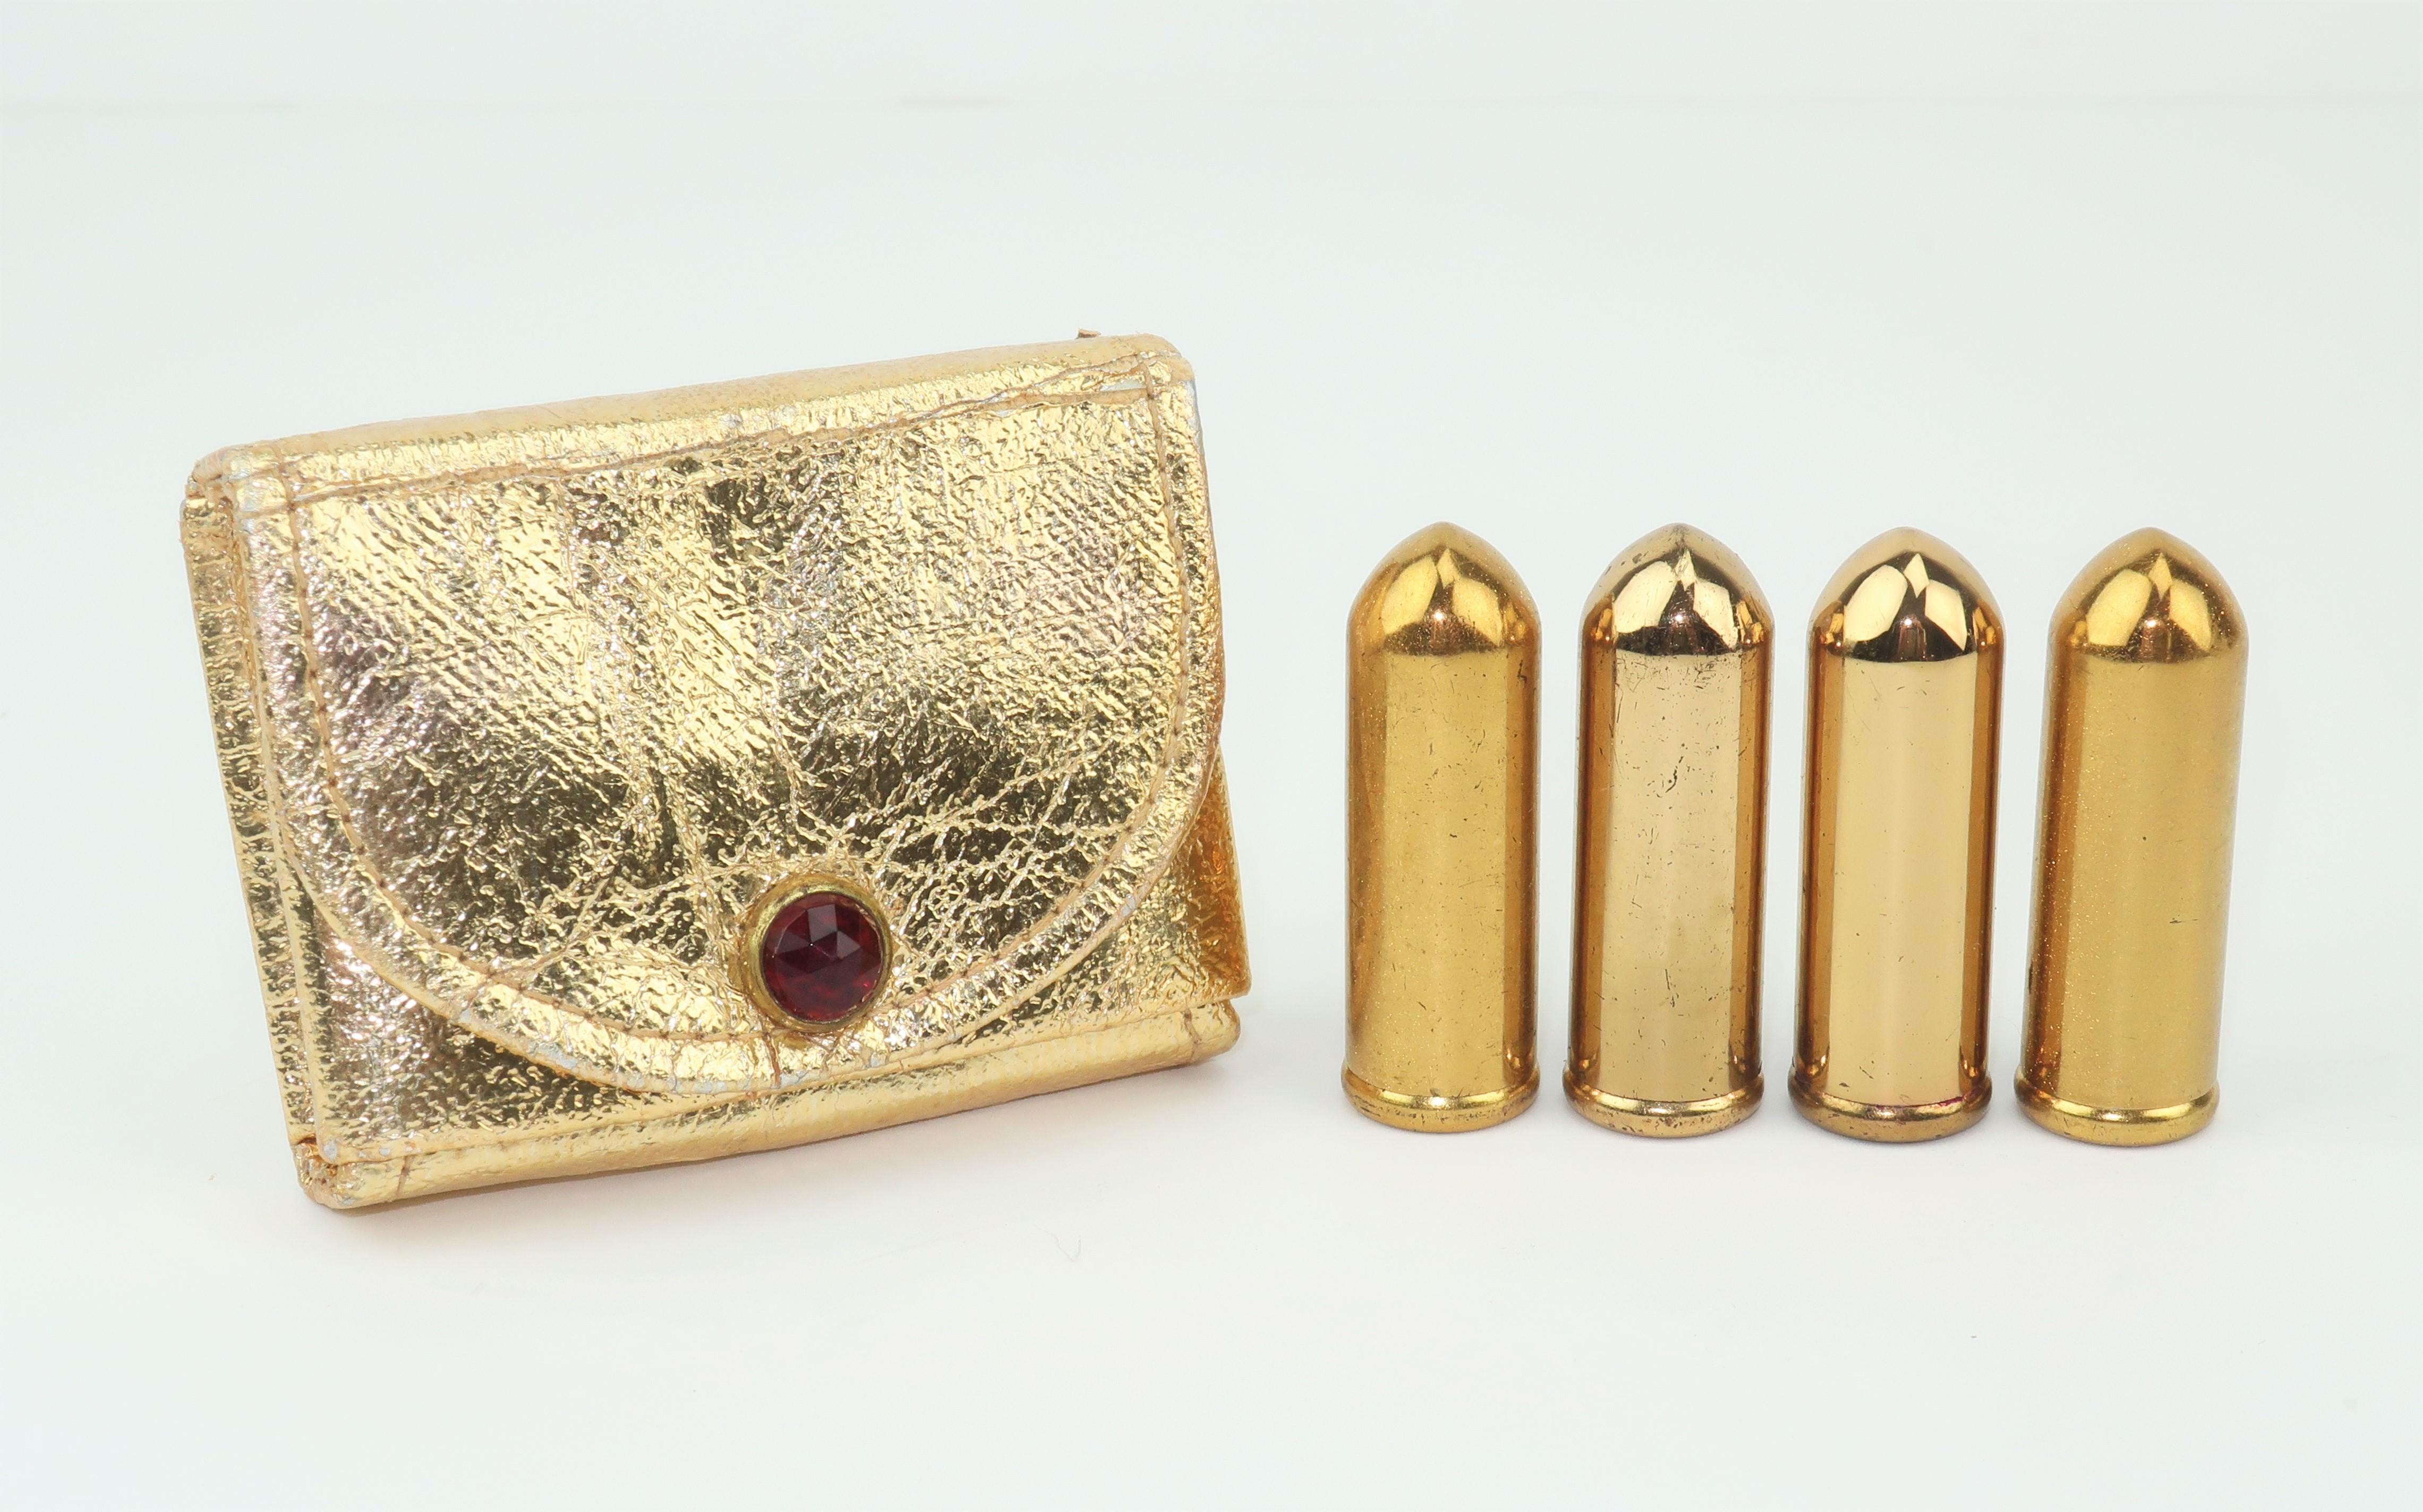 The iconic American cosmetics company, Revlon, has been a leader in the beauty industry since the 1930's with everything from nail enamel to lipsticks.  This 1940's set includes four metal bullet shaped lipsticks with a a gold carrying case